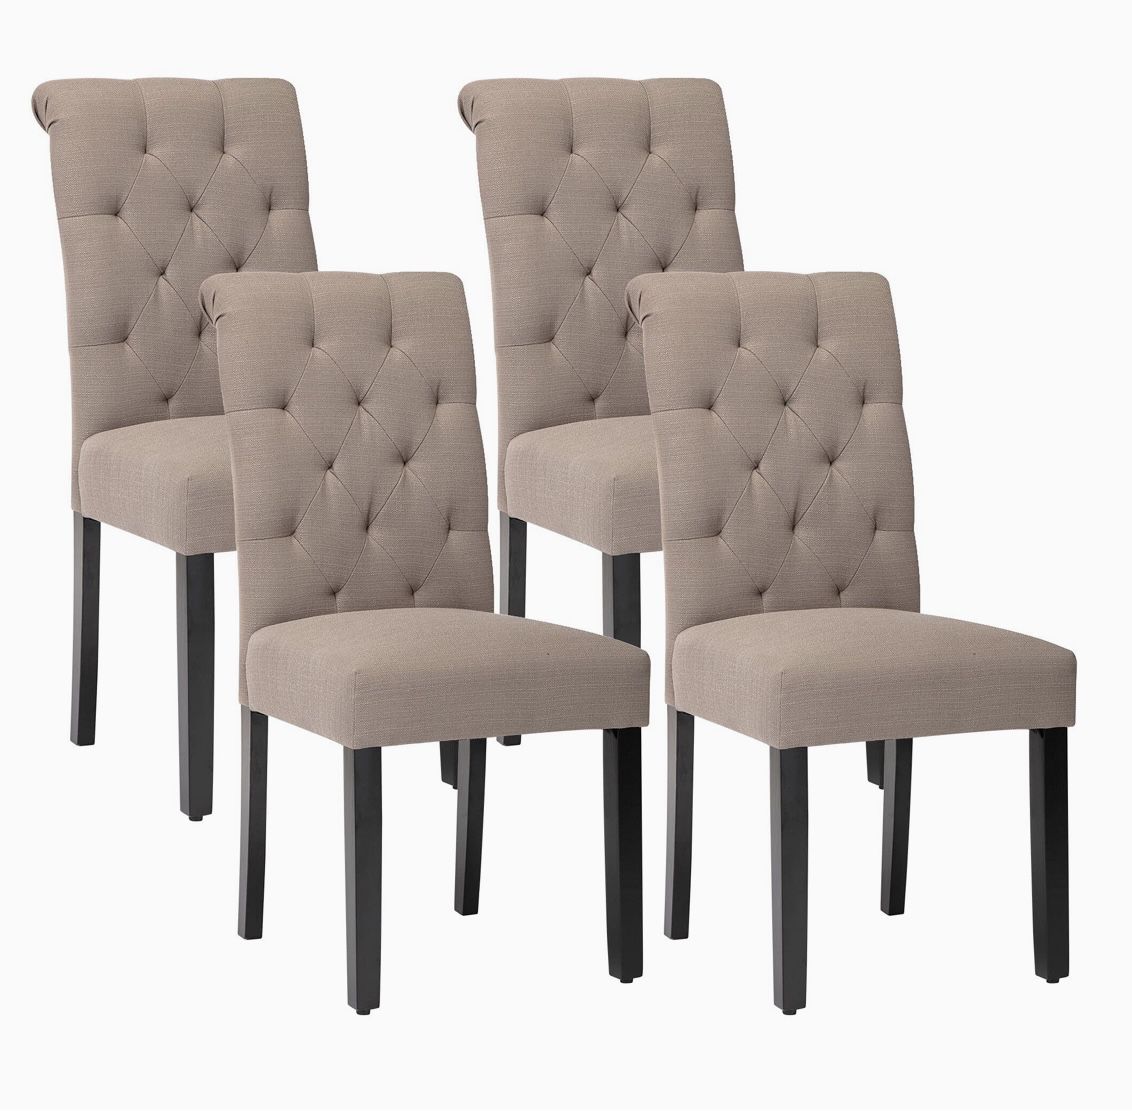 New Upholstered Dining Chairs With, Dining Chairs Atlanta Ga